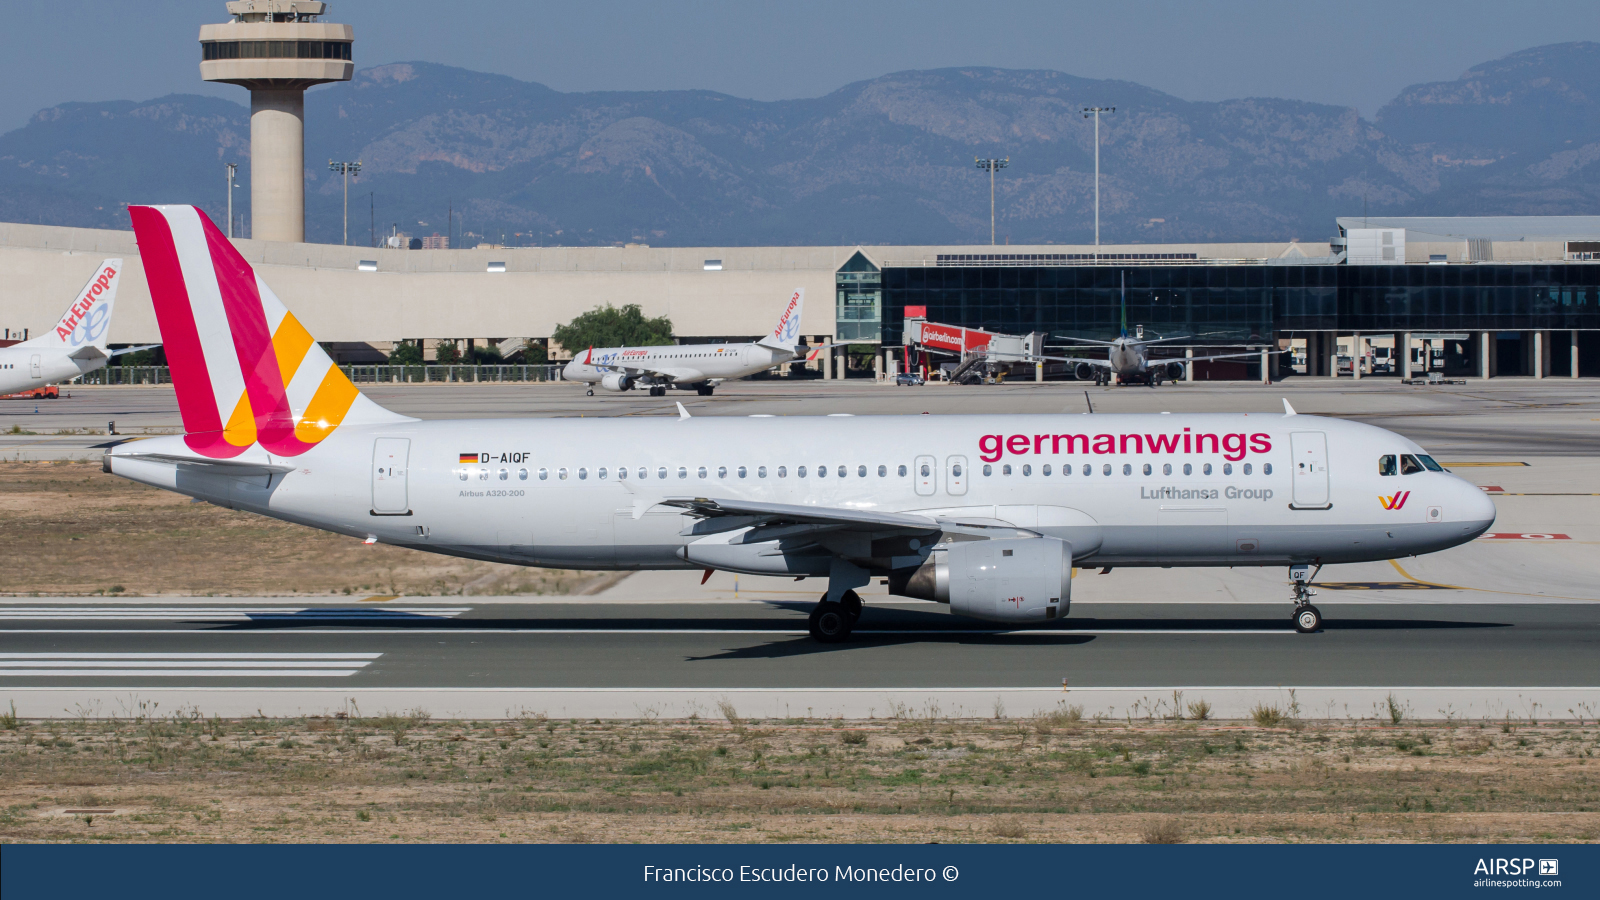 Germanwings  Airbus A320  D-AIQF